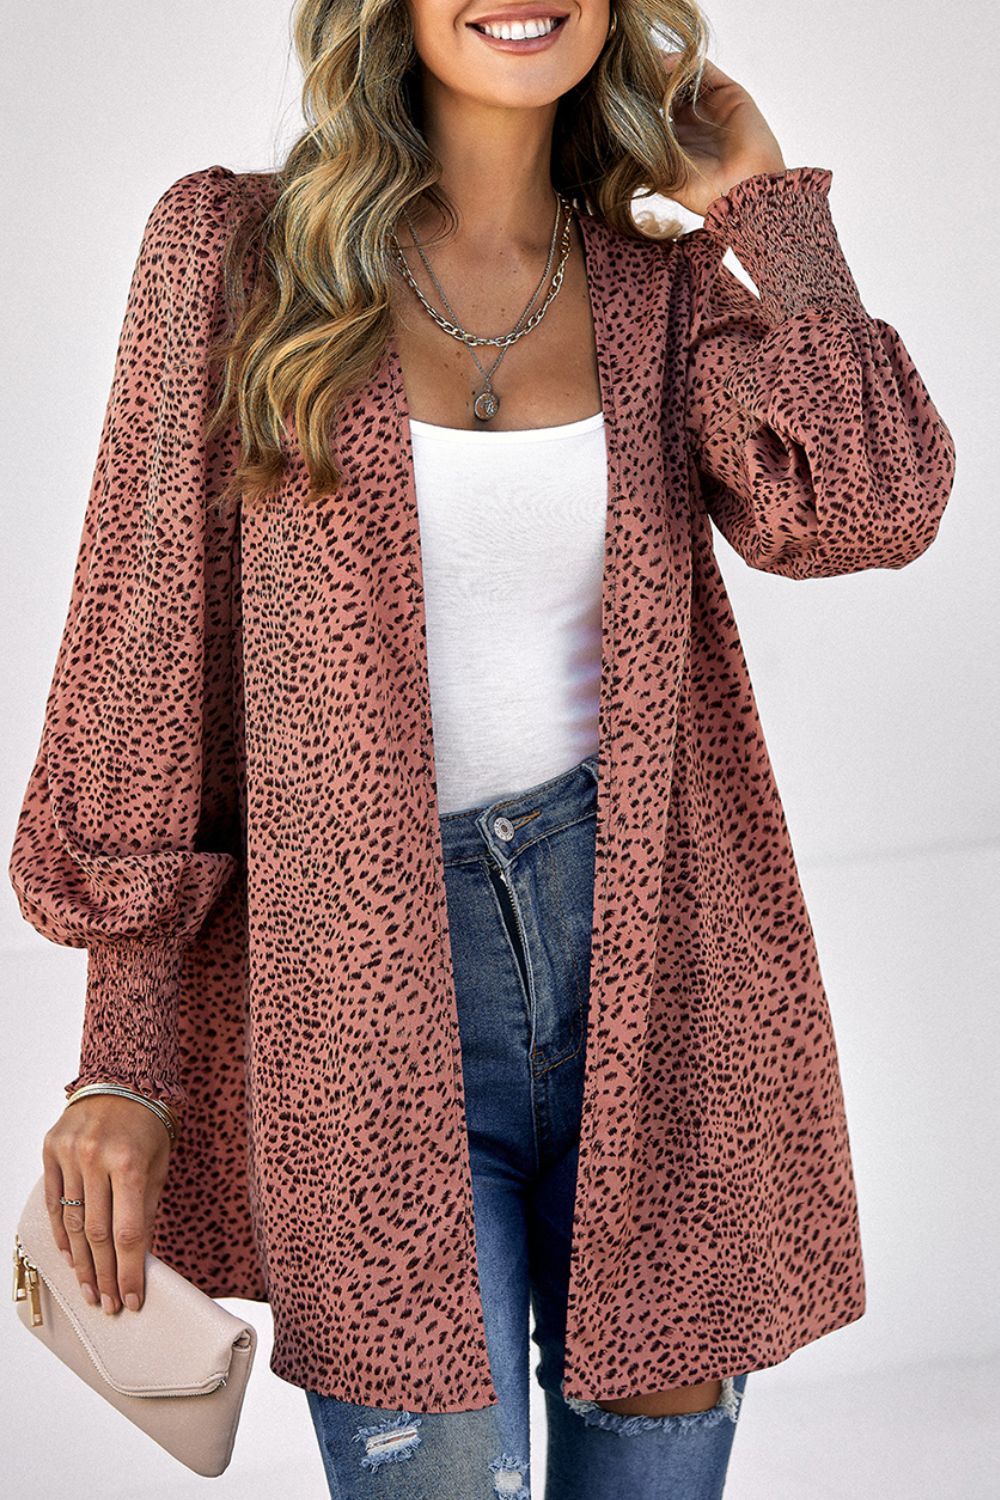 Leopard Print Balloon Sleeve Cardigan - Women’s Clothing & Accessories - Shirts & Tops - 6 - 2024